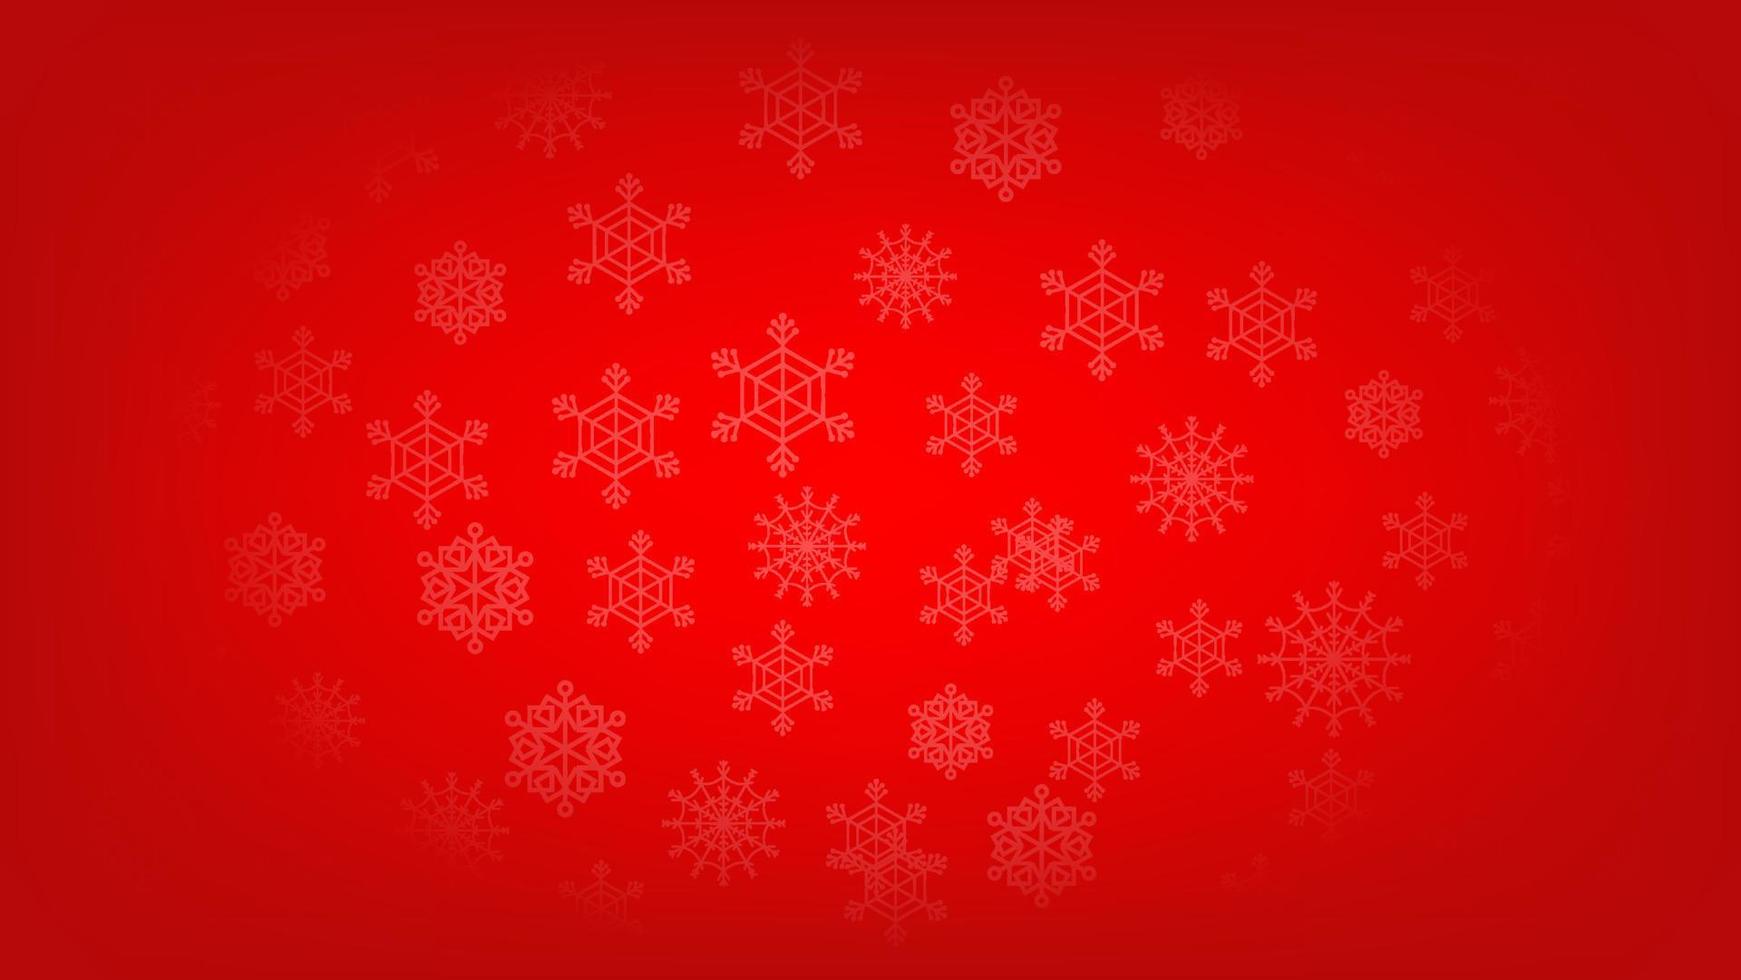 Christmas background. festive holiday and happy new year decoration. snowflakes pattern on red lighting for greeting card graphic design vector